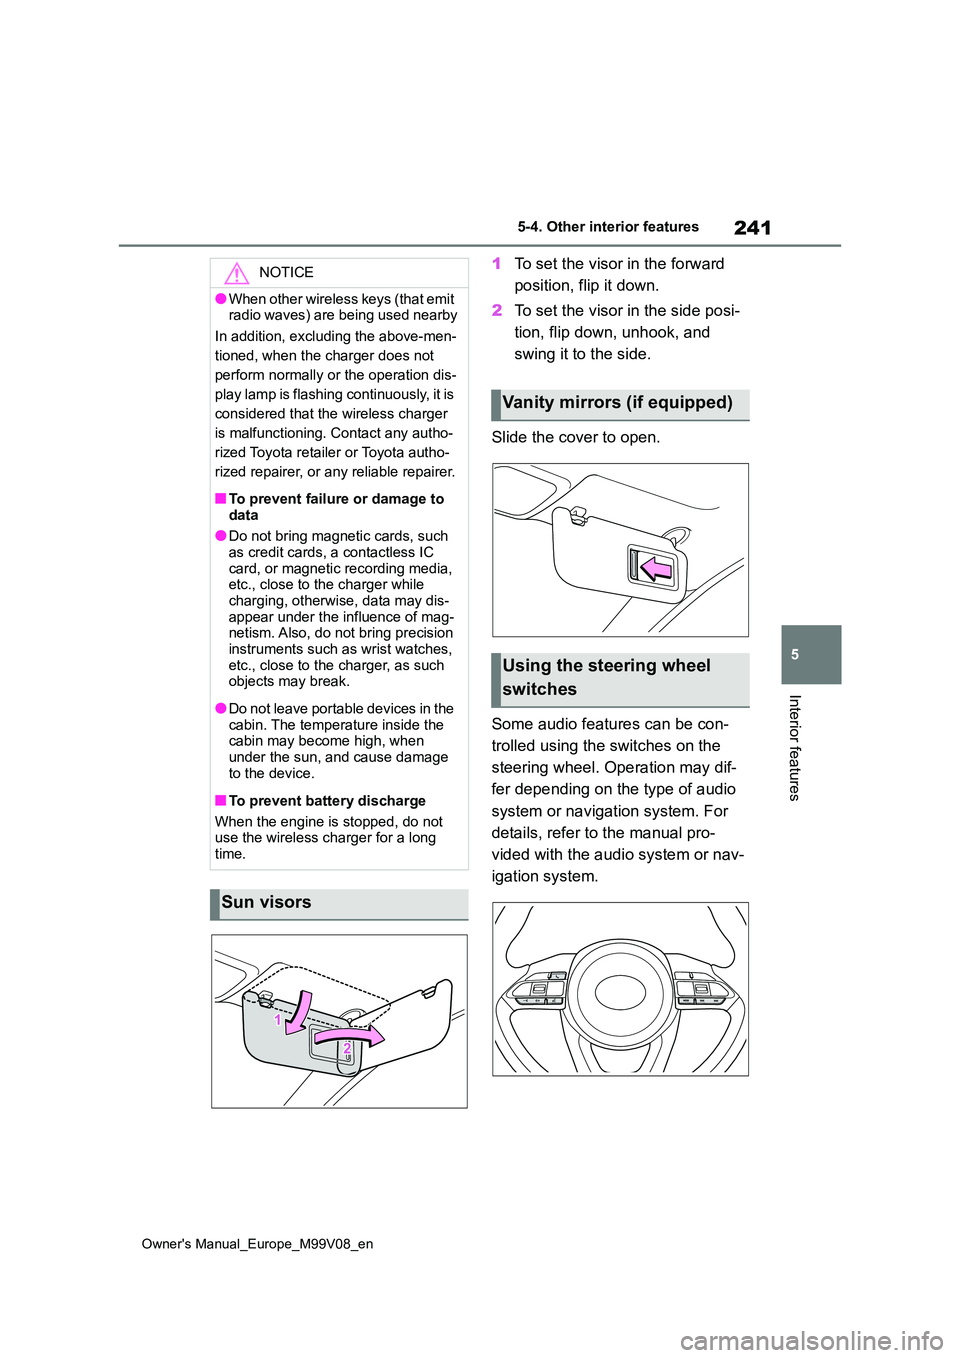 TOYOTA AYGO X 2022  Owners Manual (in English) 241
5
Owner's Manual_Europe_M99V08_en
5-4. Other interior features
Interior features
1To set the visor in the forward  
position, flip it down. 
2 To set the visor in the side posi- 
tion, flip do